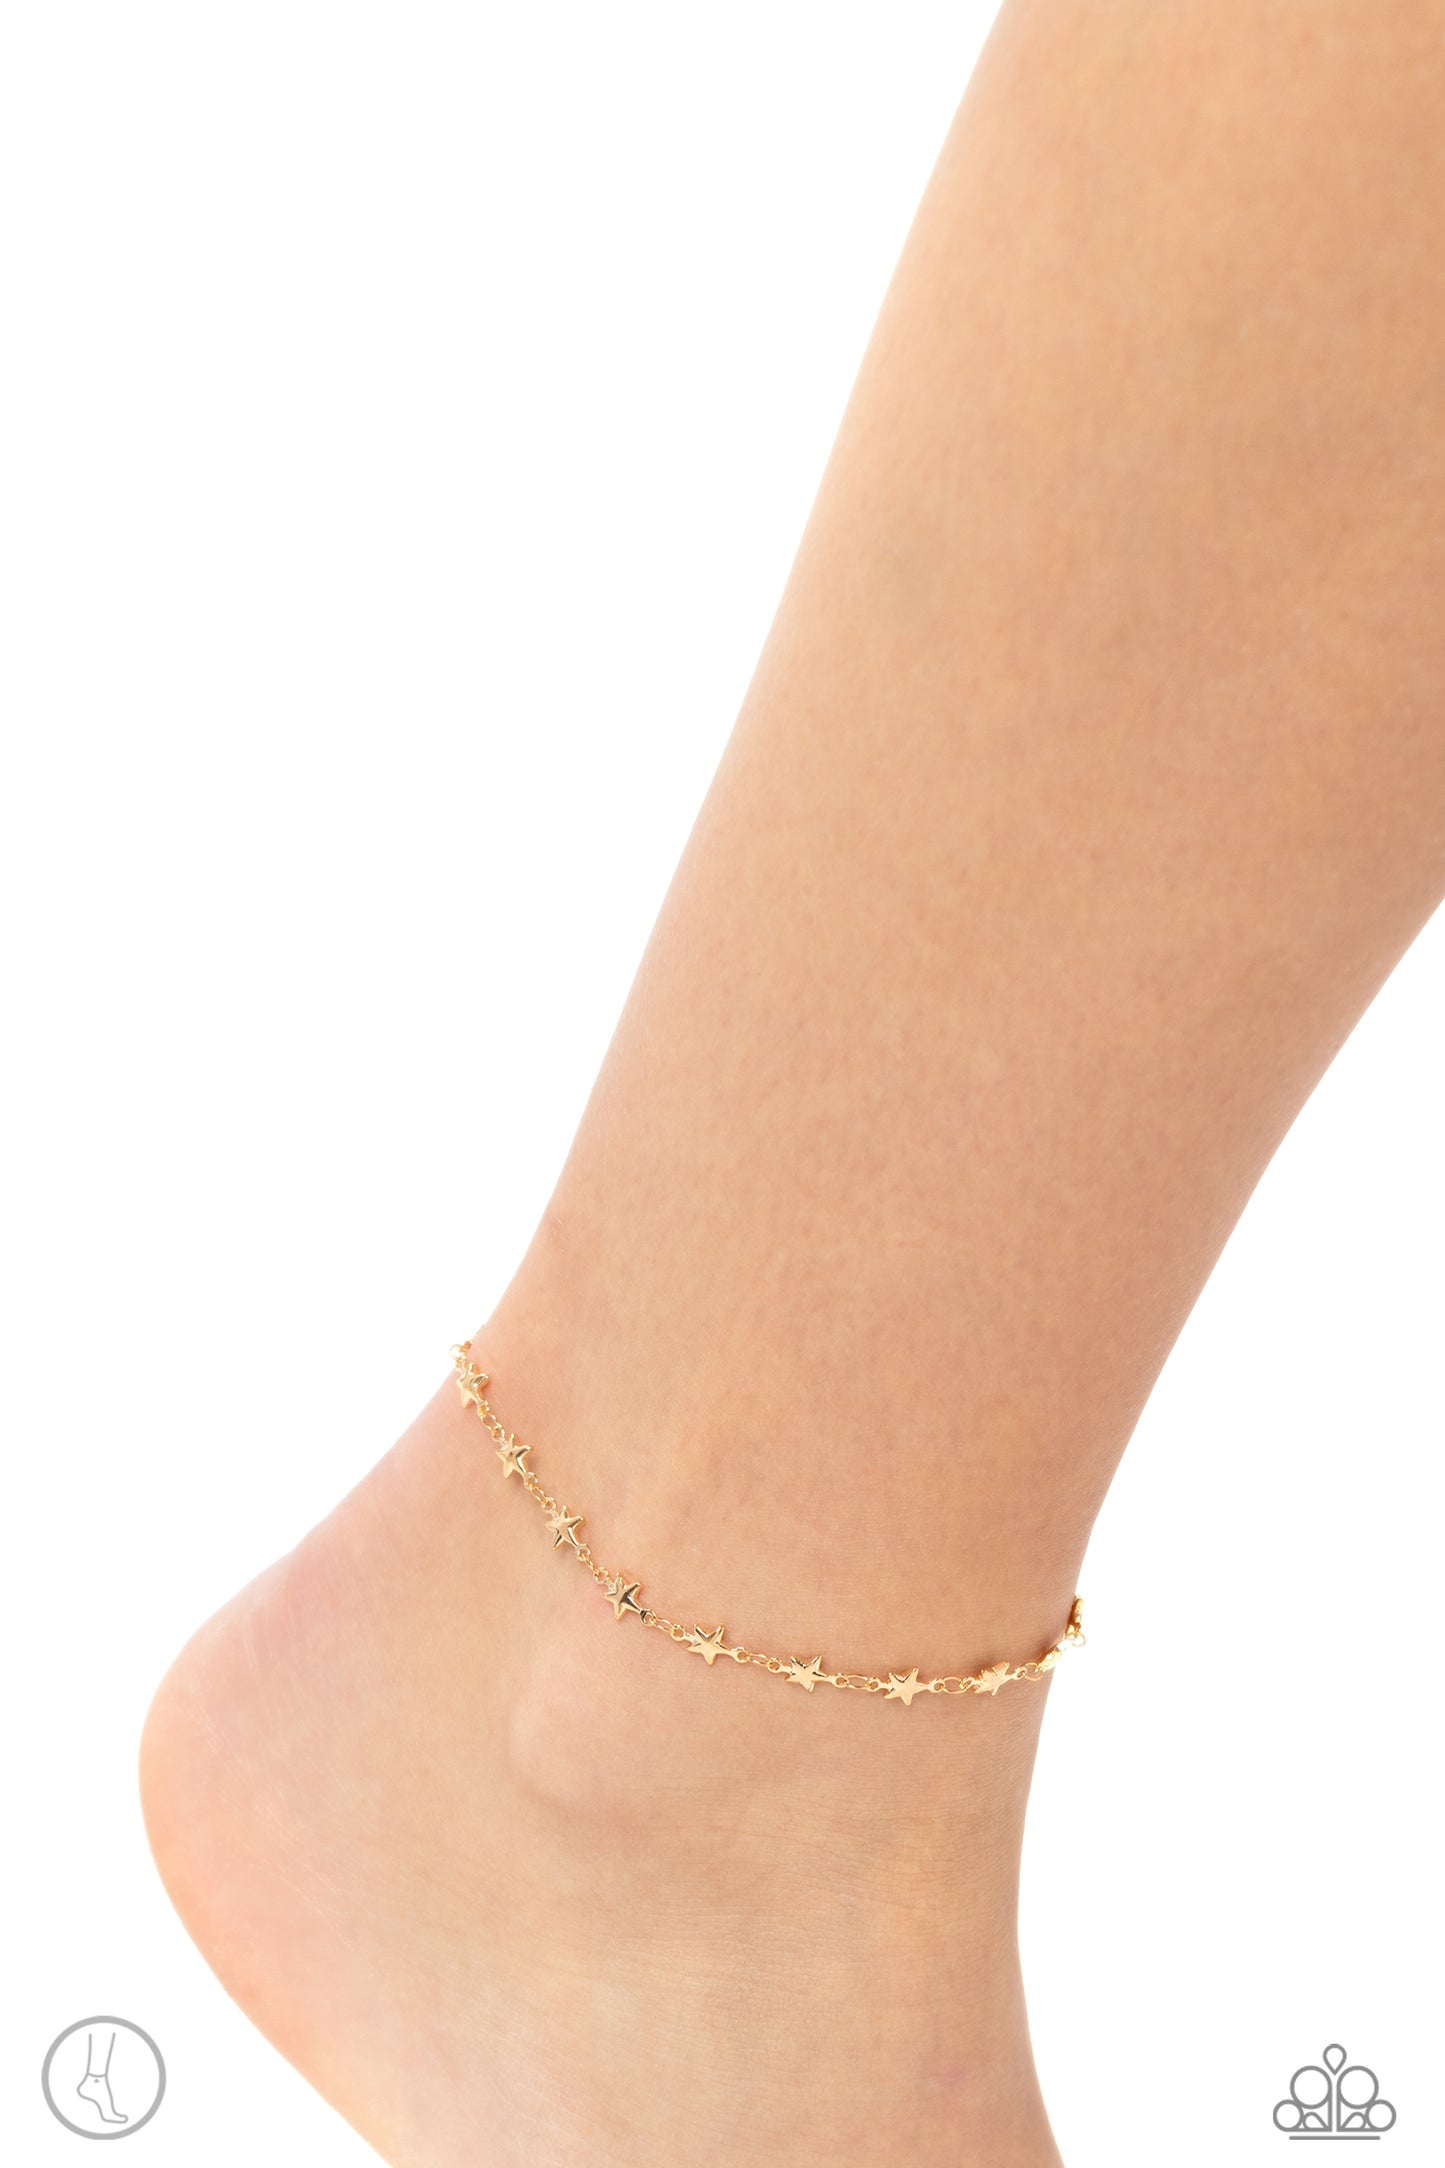 Paparazzi Anklets - Starry Swing Dance - Gold